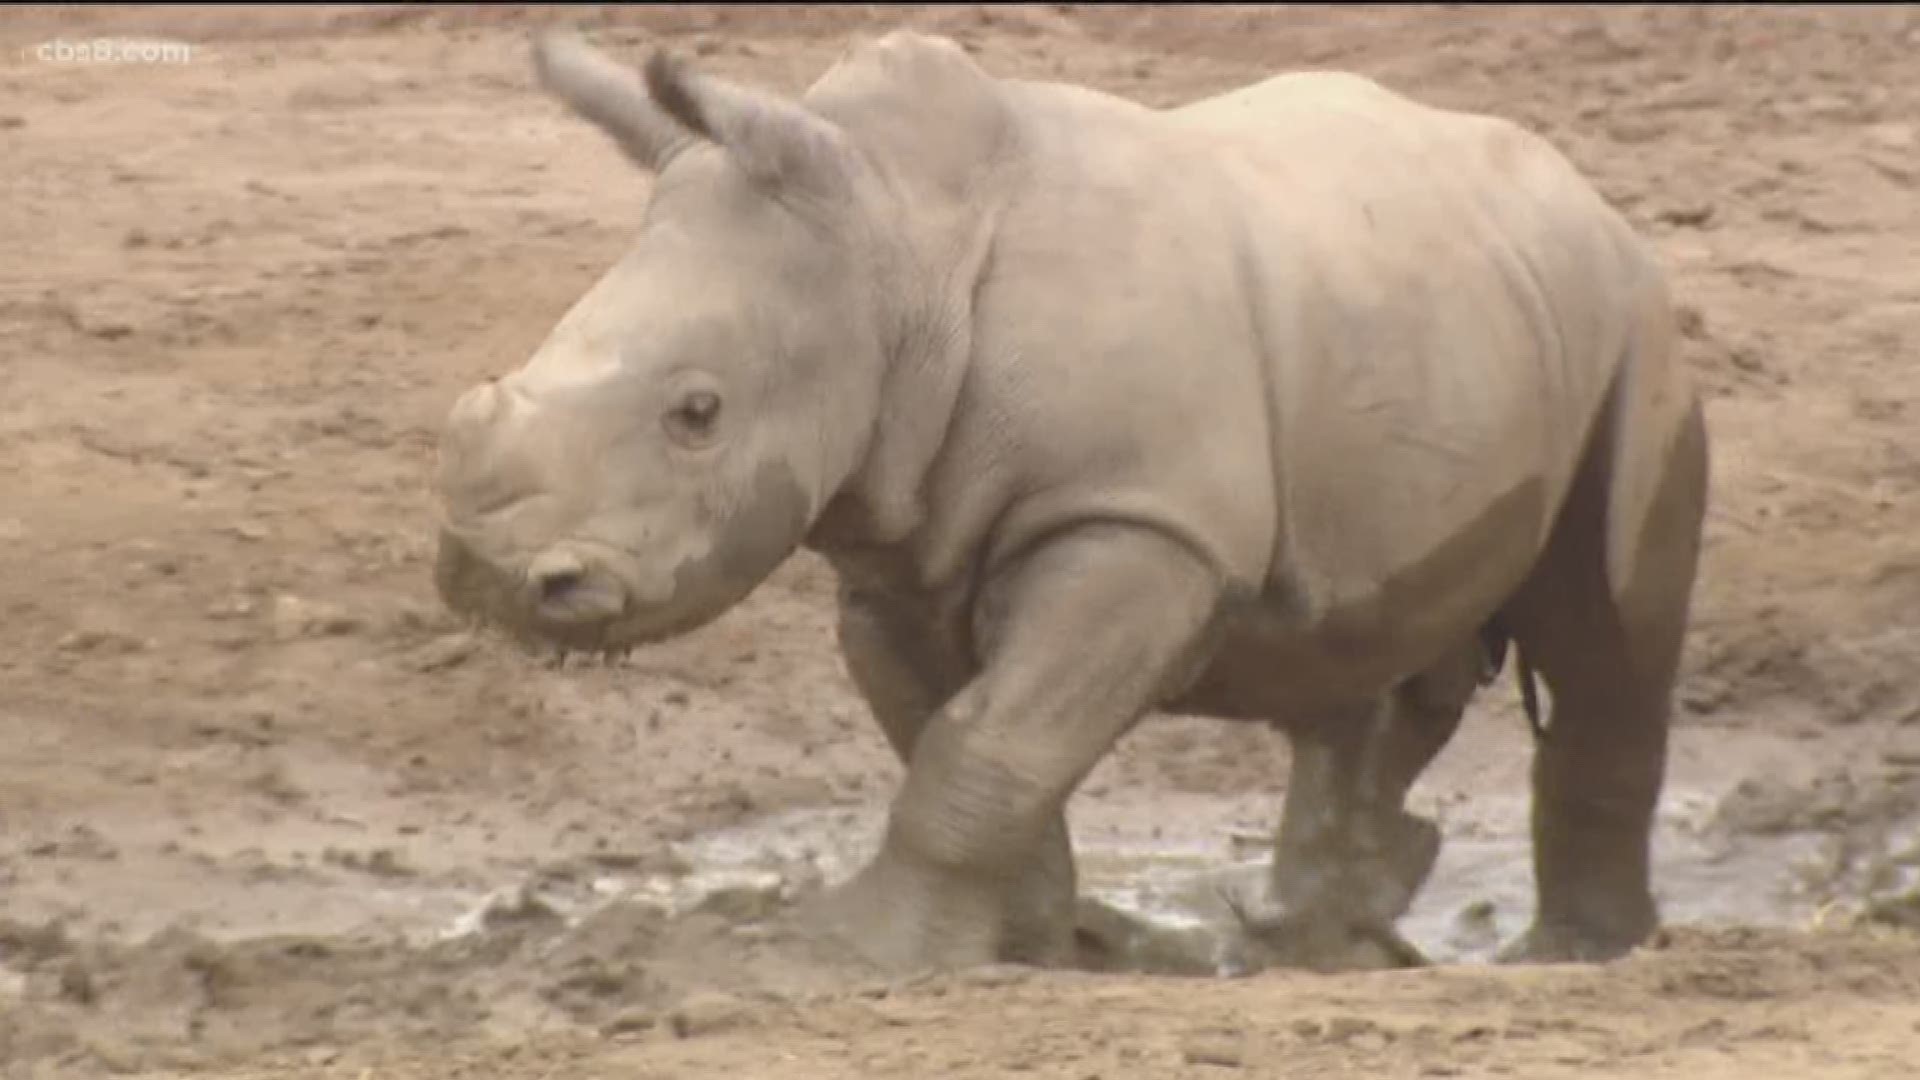 Edward was the first southern white rhino calf conceived through artificial insemination and was born to mother Victoria after 493 days of gestation.